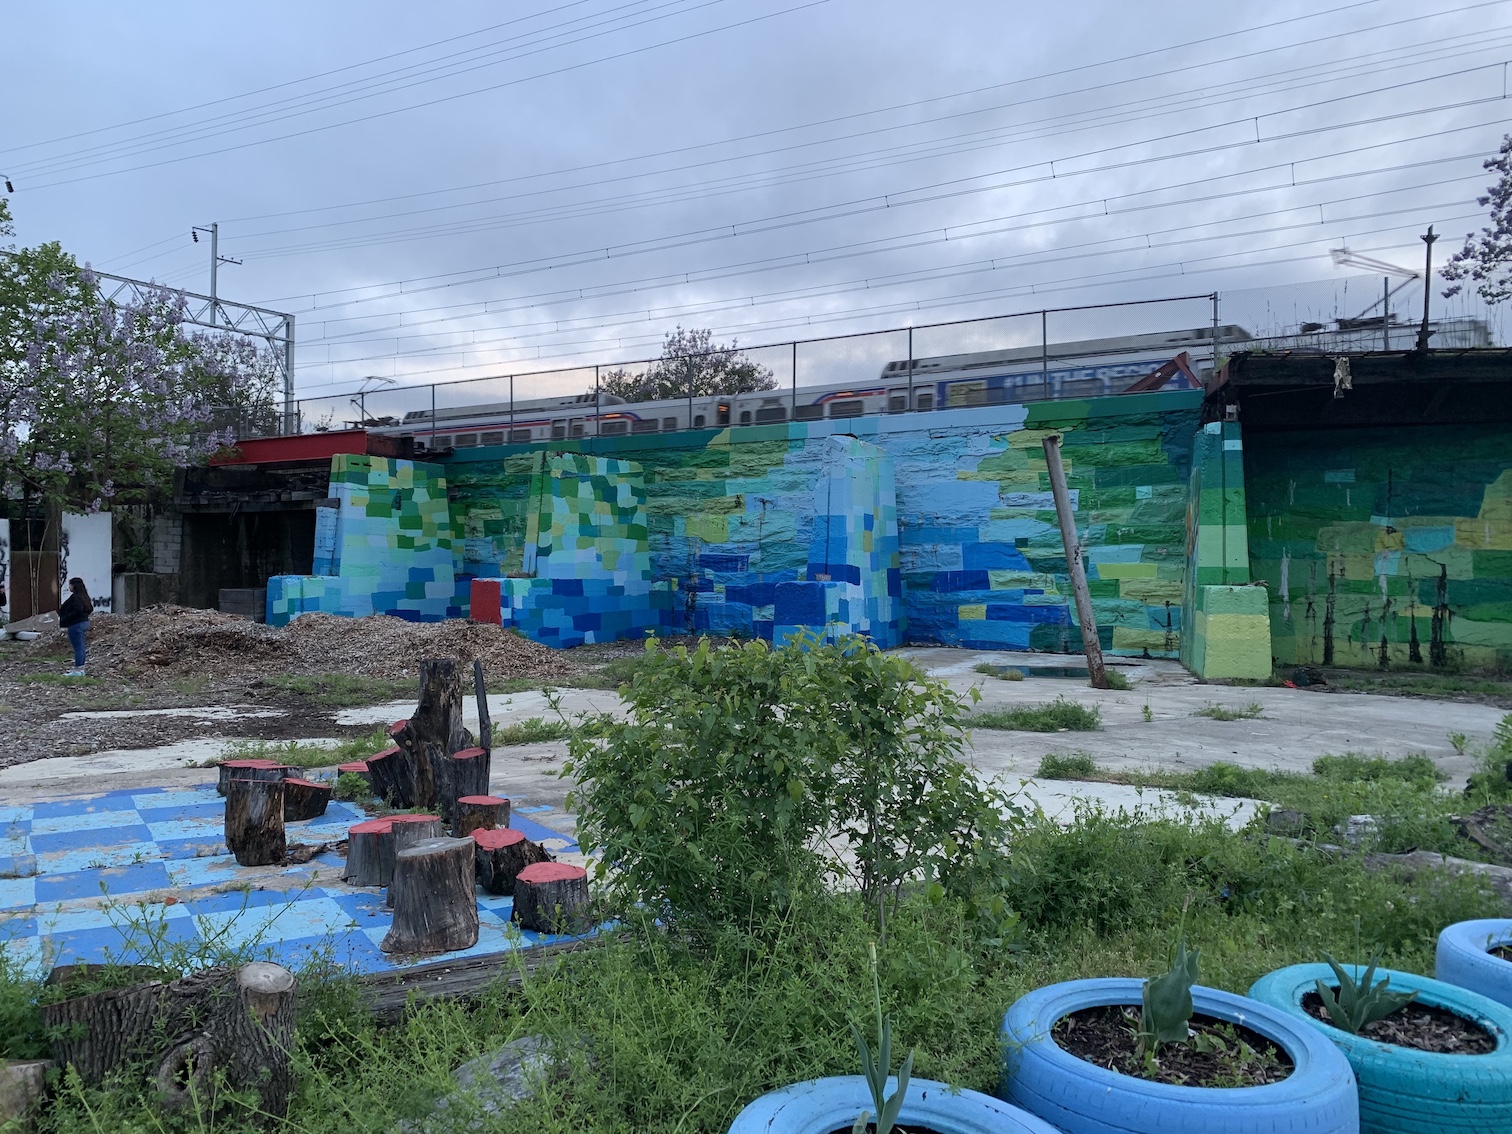 Image description: urban farm with painted ball courts & train in the background. in the foreground are tires painted blue with plants inside them. There is an oversized checkerboard in the center with blue squares and tree stumps as pieces. In the back to the left is a person standing by some mulch. There is a blue & green patterned mural on the wall in the back with an idled train atop the wall.